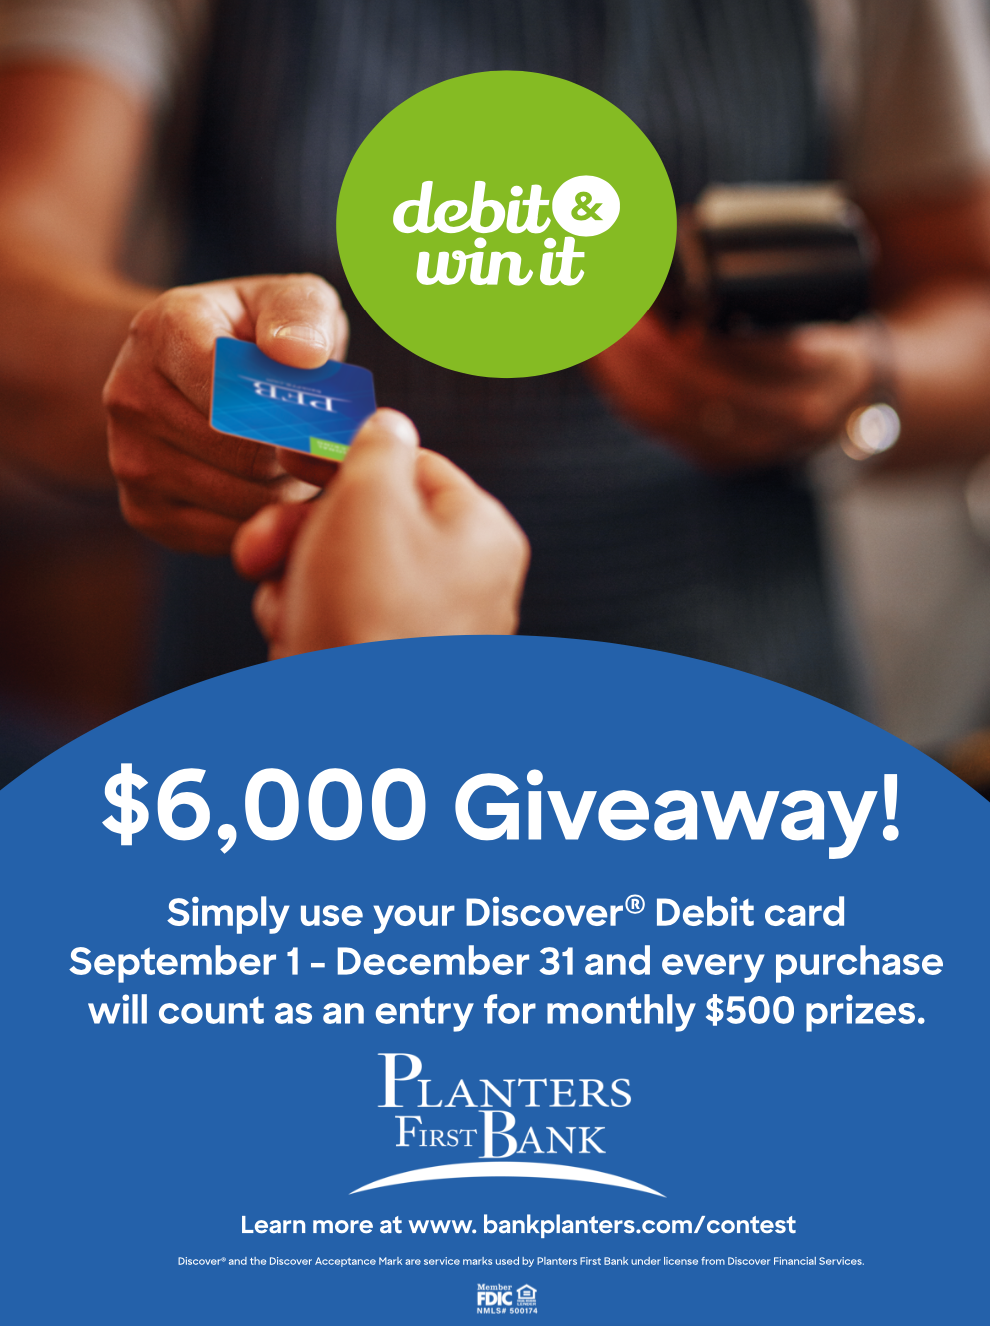 2021 Debit and win it Sweepstakes